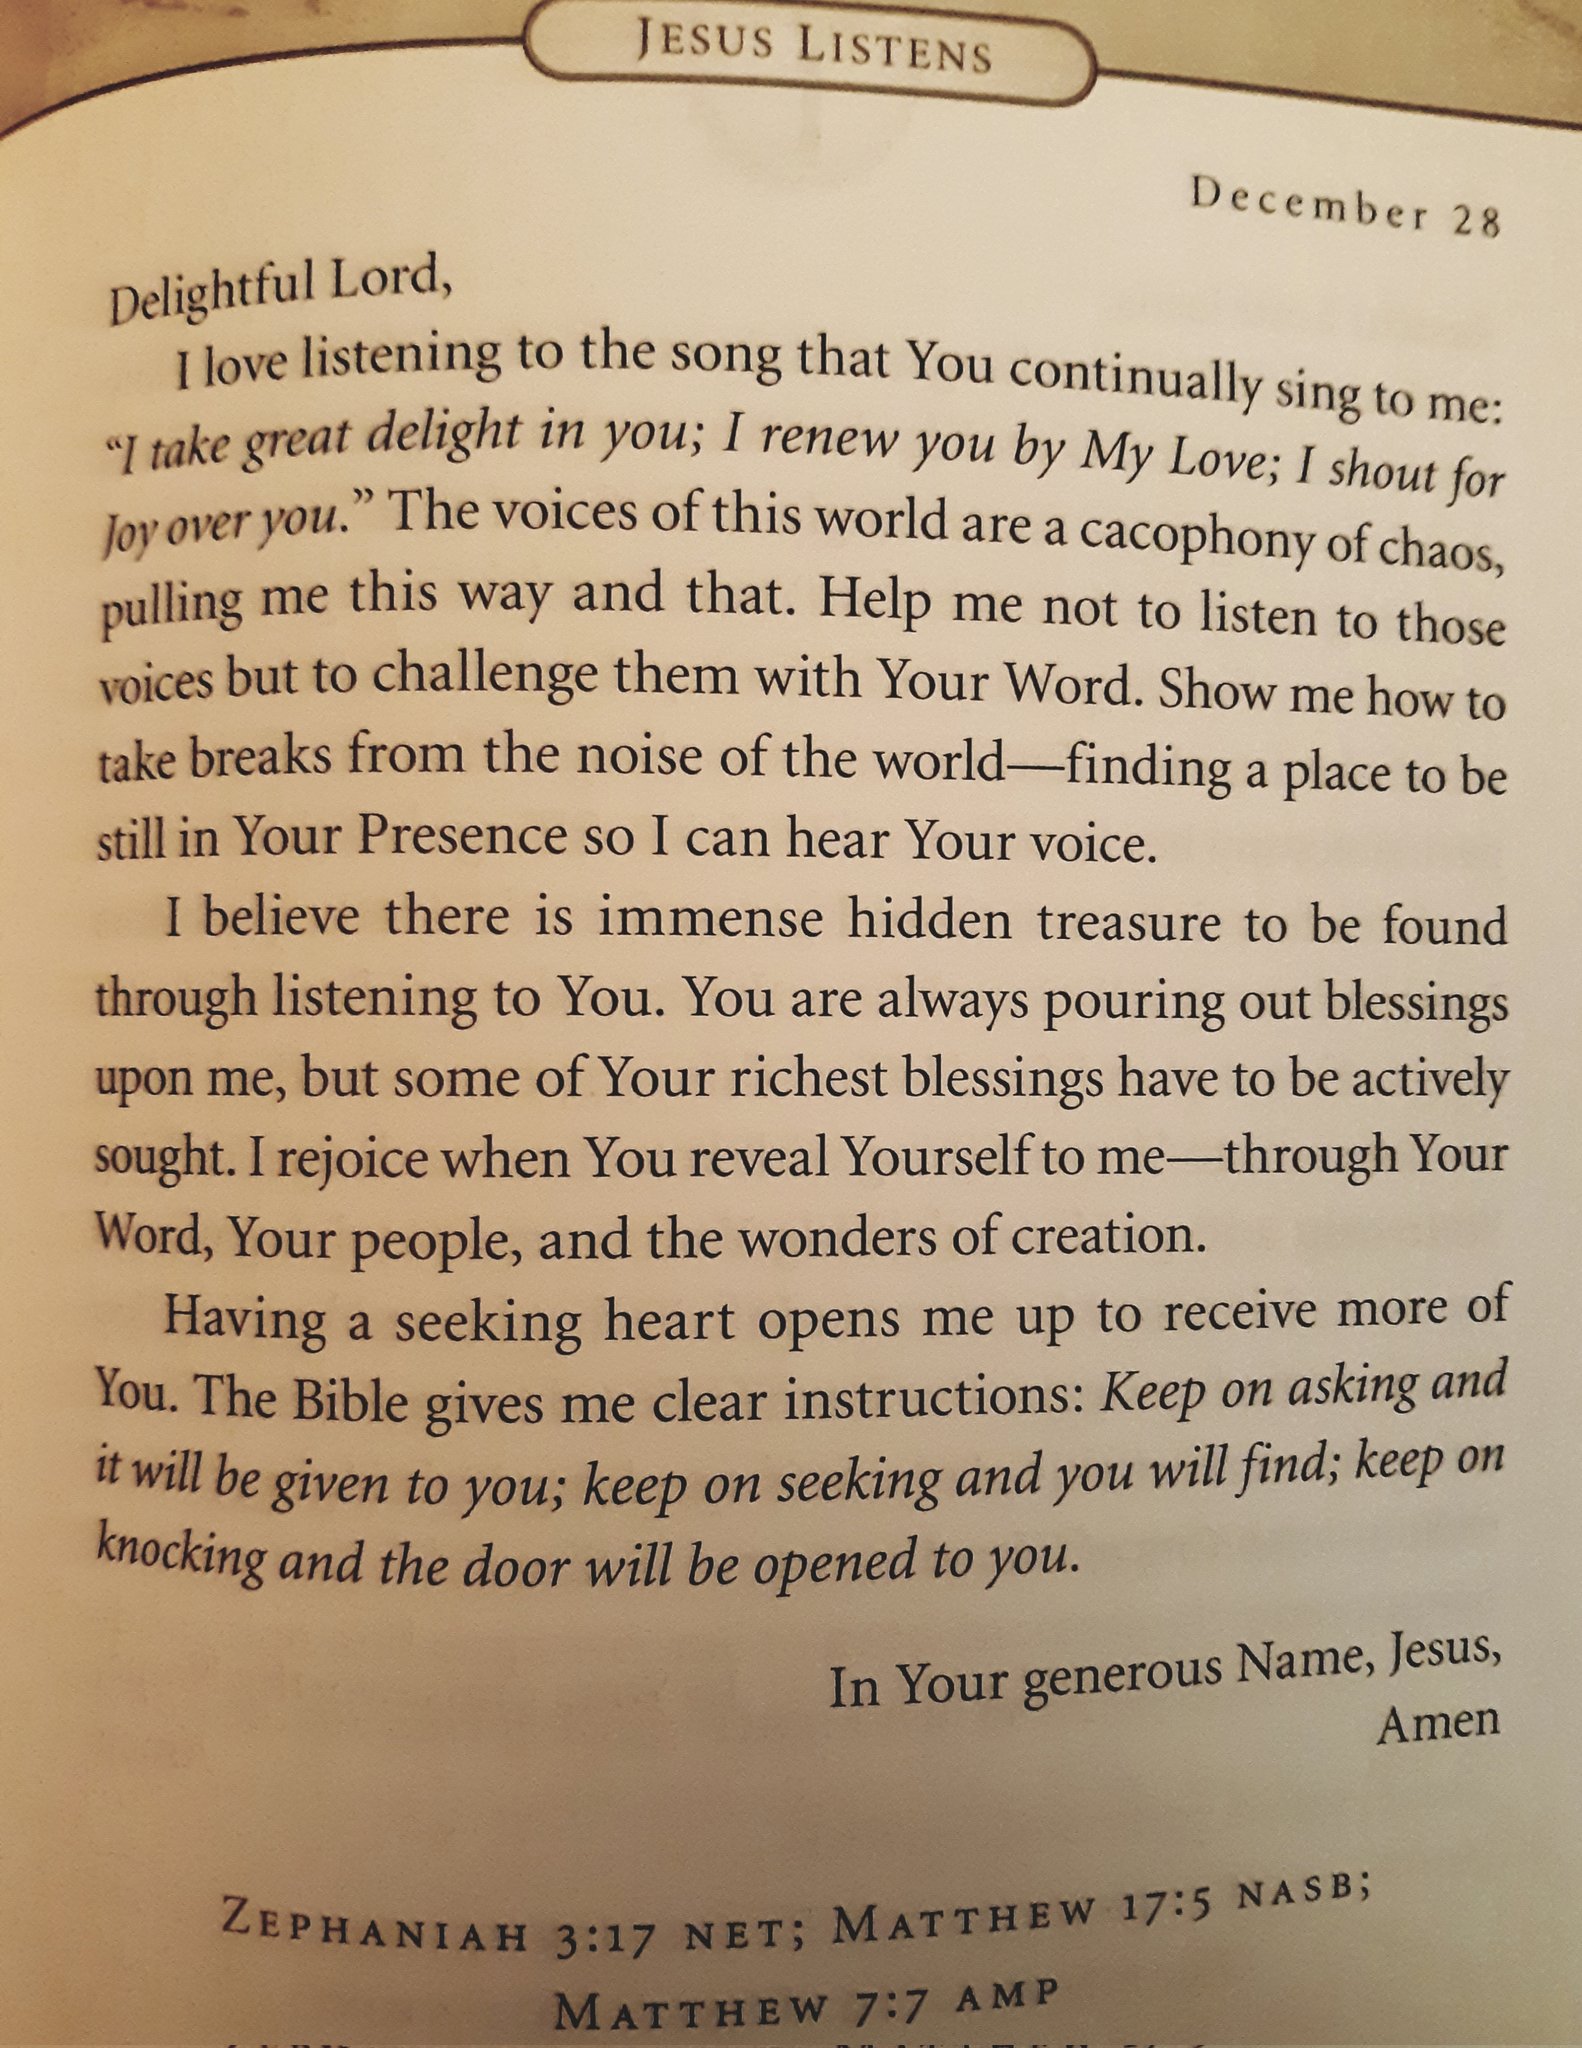 JESUS LISTENS December 28 Lord, love listening to the song that You continually = to me: ~Itake delight in you; renew you by My Love; for Joy vou: The voices ofthis world are a cacophony of c chaos, pulling me this way and that: Help me not to listen to those Foices but to challenge them with Your Word. Show me how to take breaks from the noise of the world- place to be still in Your Presence so [ can Your voice_ believe there is immense hidden treasure to be found through listening to You: You are pouring out blessings upon me; but some of Your richest blessings have to be actively sought: Irejoice when reveal Yourselfto me tthrough Your Word; Your people, and the wonders of creation. seeking heart opens me up to receive more of You: The Bible gives me clear instructions: Keep on and itwill be given to you; keep on seeking you will find; keep on and the door will be to you: Name; Jesus; In Your Amen MATTHEW 17:5 NASB; 3:17 NET; MATTHEW 7:7 AMP Delightful F 'sing " great shout Over ~finding = hear always You Having asking' and knocking = opened generous ZEPAANIAH